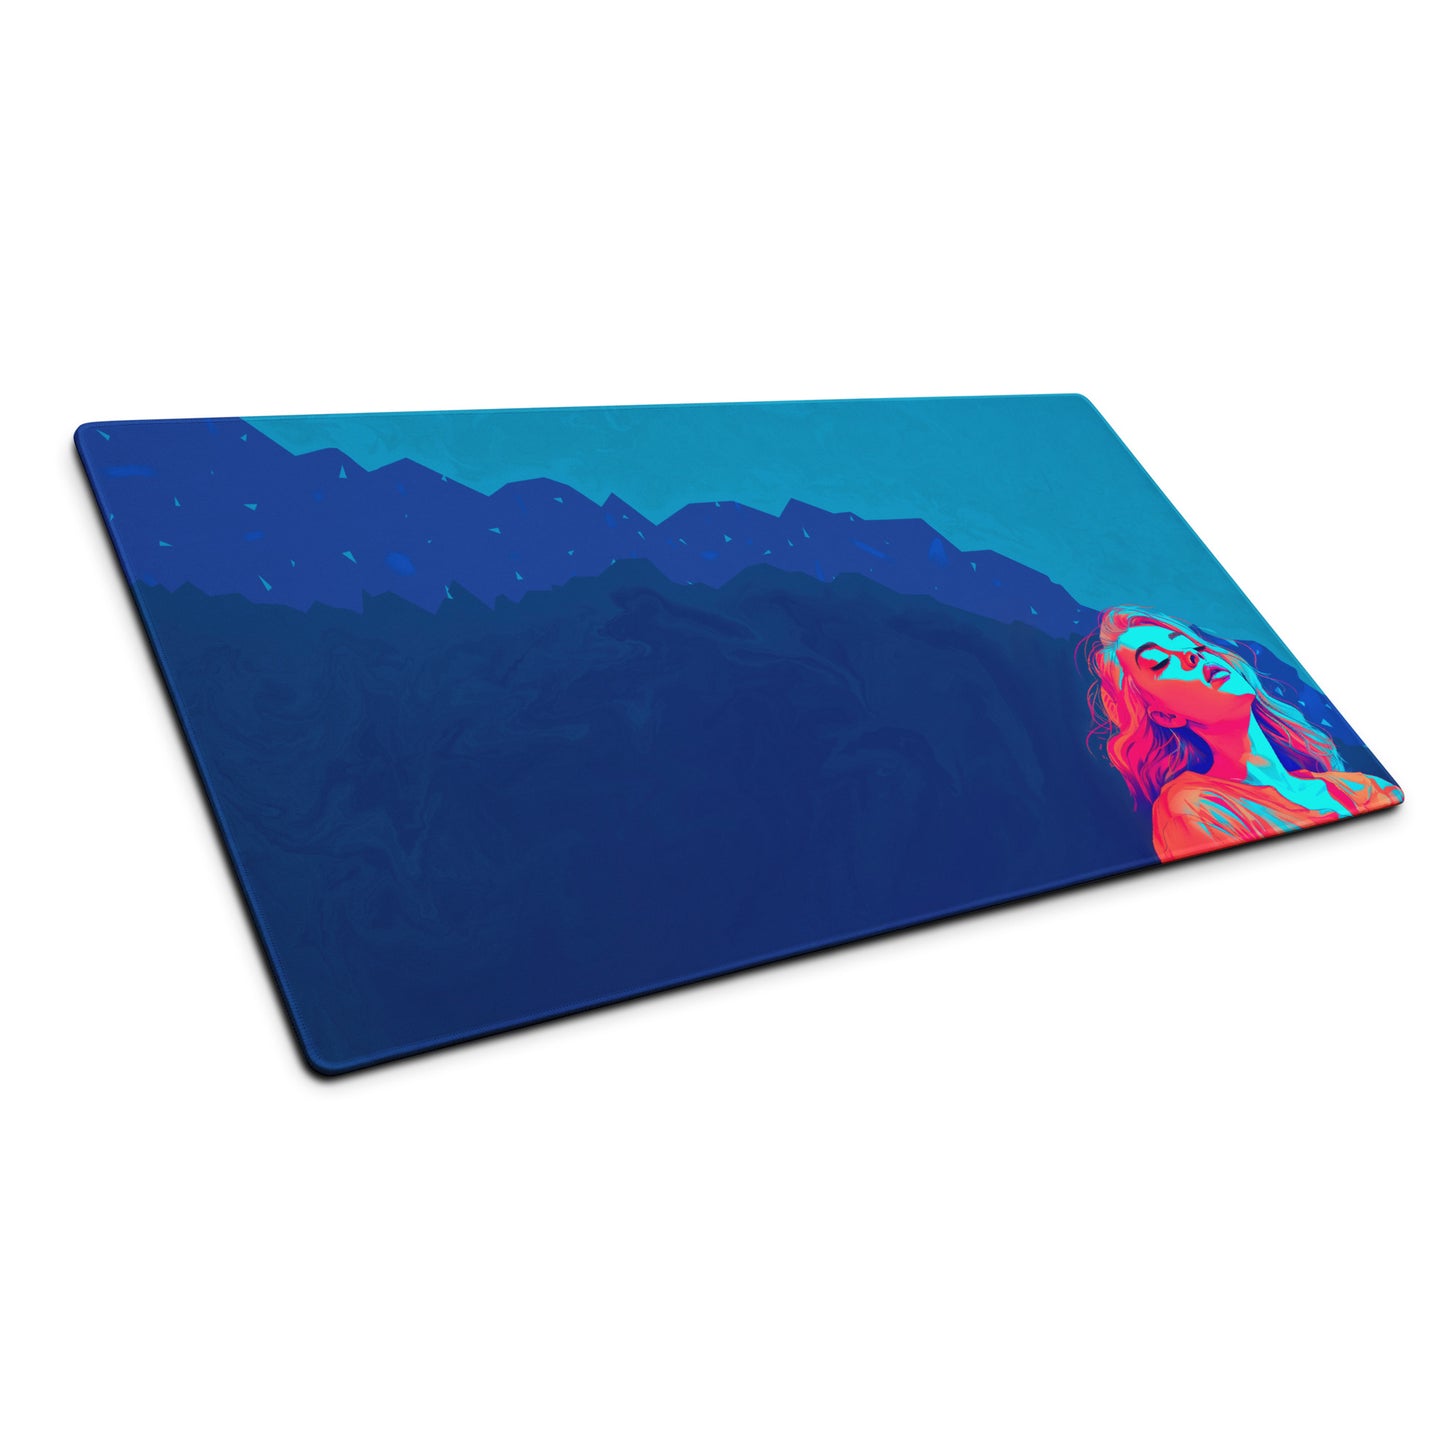 A 36" x 18" blue desk pad with a girl looking up sitting at an angle.